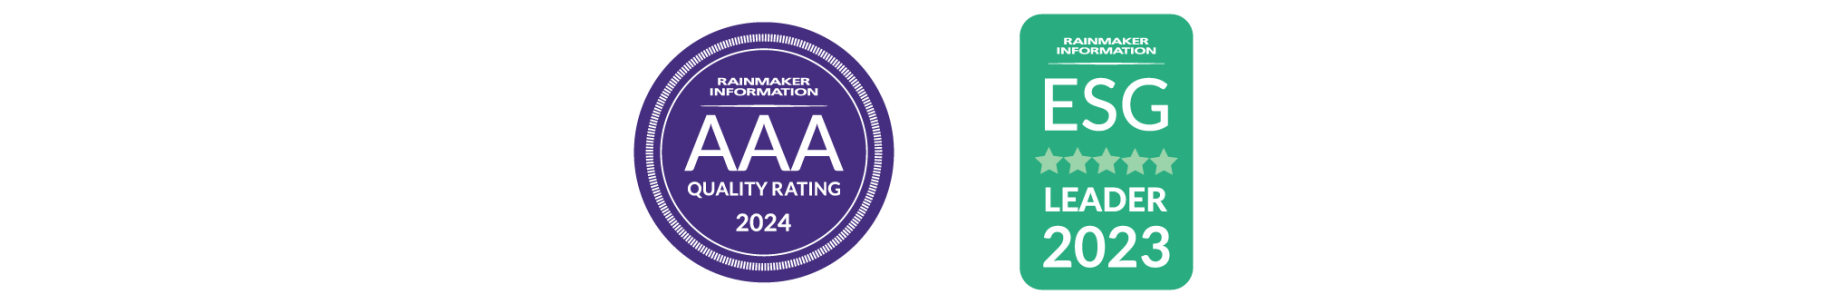 Rainmaker AAA Quality Rating 2024 and ESG Leader 2023 logos